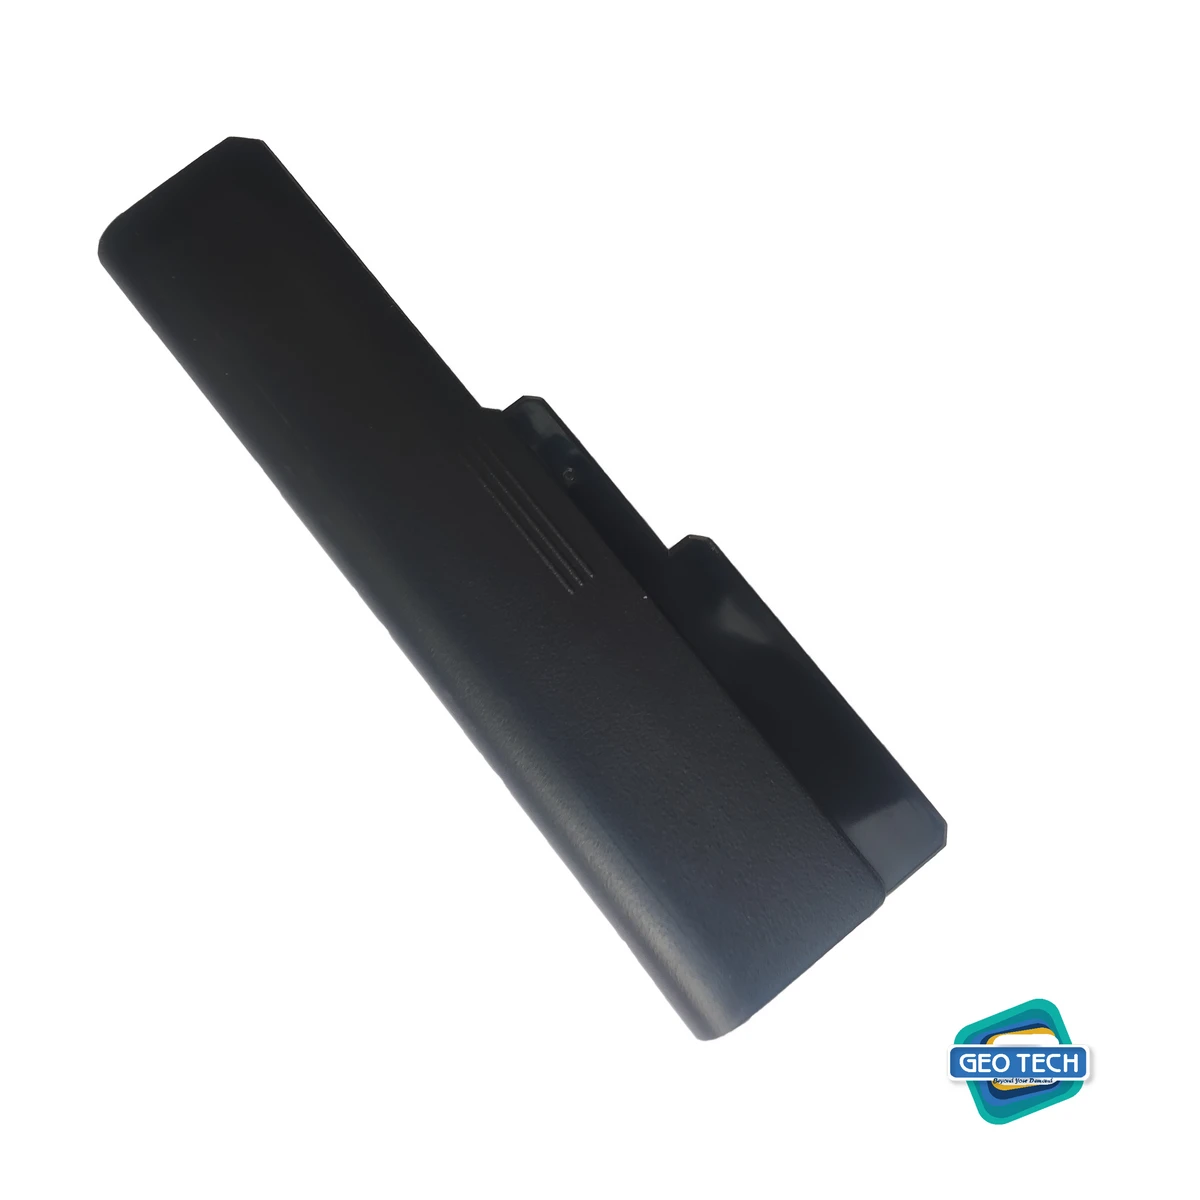 New replacement Laptop Battery for T60 T60p T61 T61p R61i R61e R61 R60e R60 R500 T500 W500 SL500 SL400 SL300 92p1142 92P1141 92P1139 92P1137 92P1133 92P1132 43r9250 42t5246 42t4620 42t4511 40Y6799 40Y